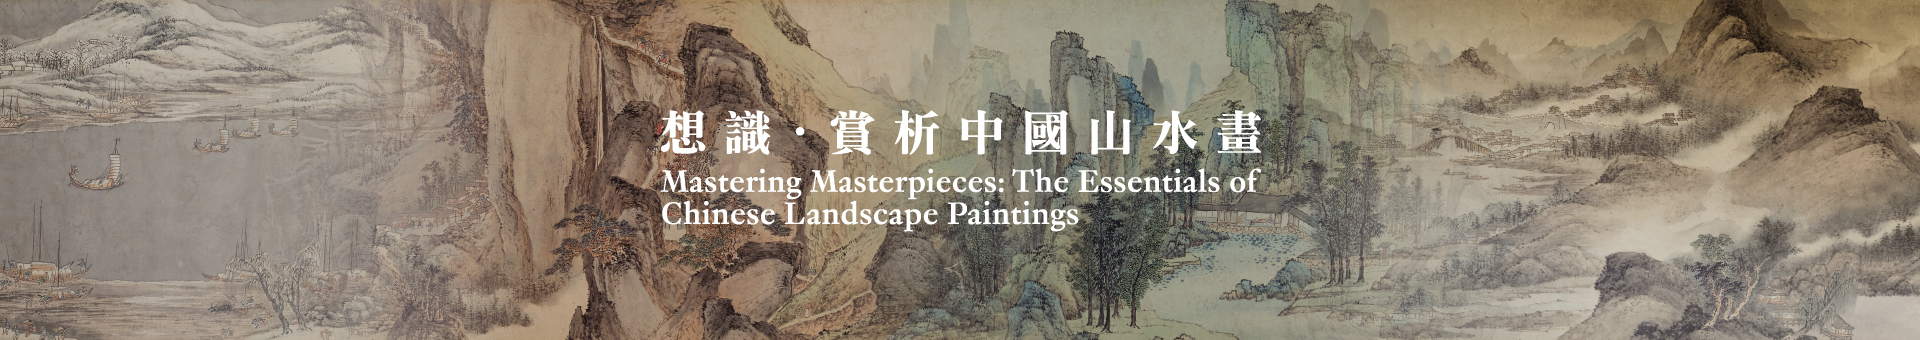 Mastering Masterpieces: The Essentials of Chinese Landscape Paintings